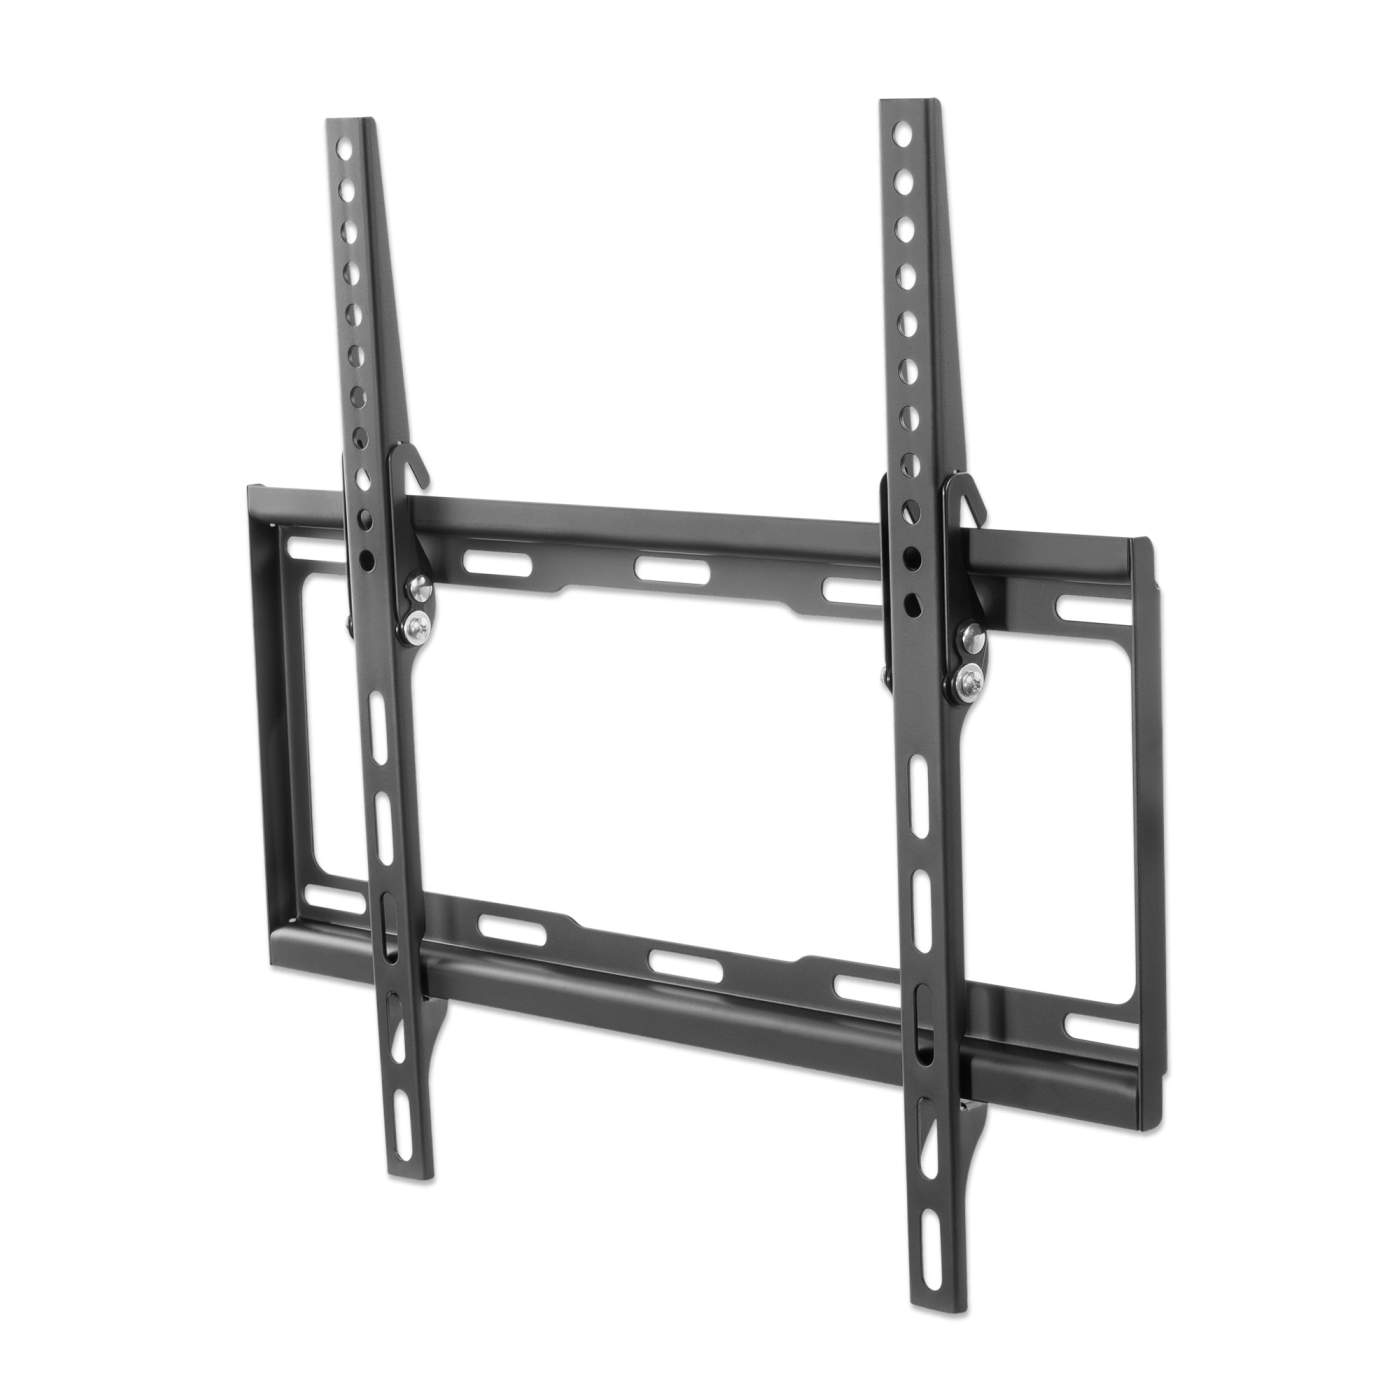 Low-Profile Tilting TV Wall Mount Image 4